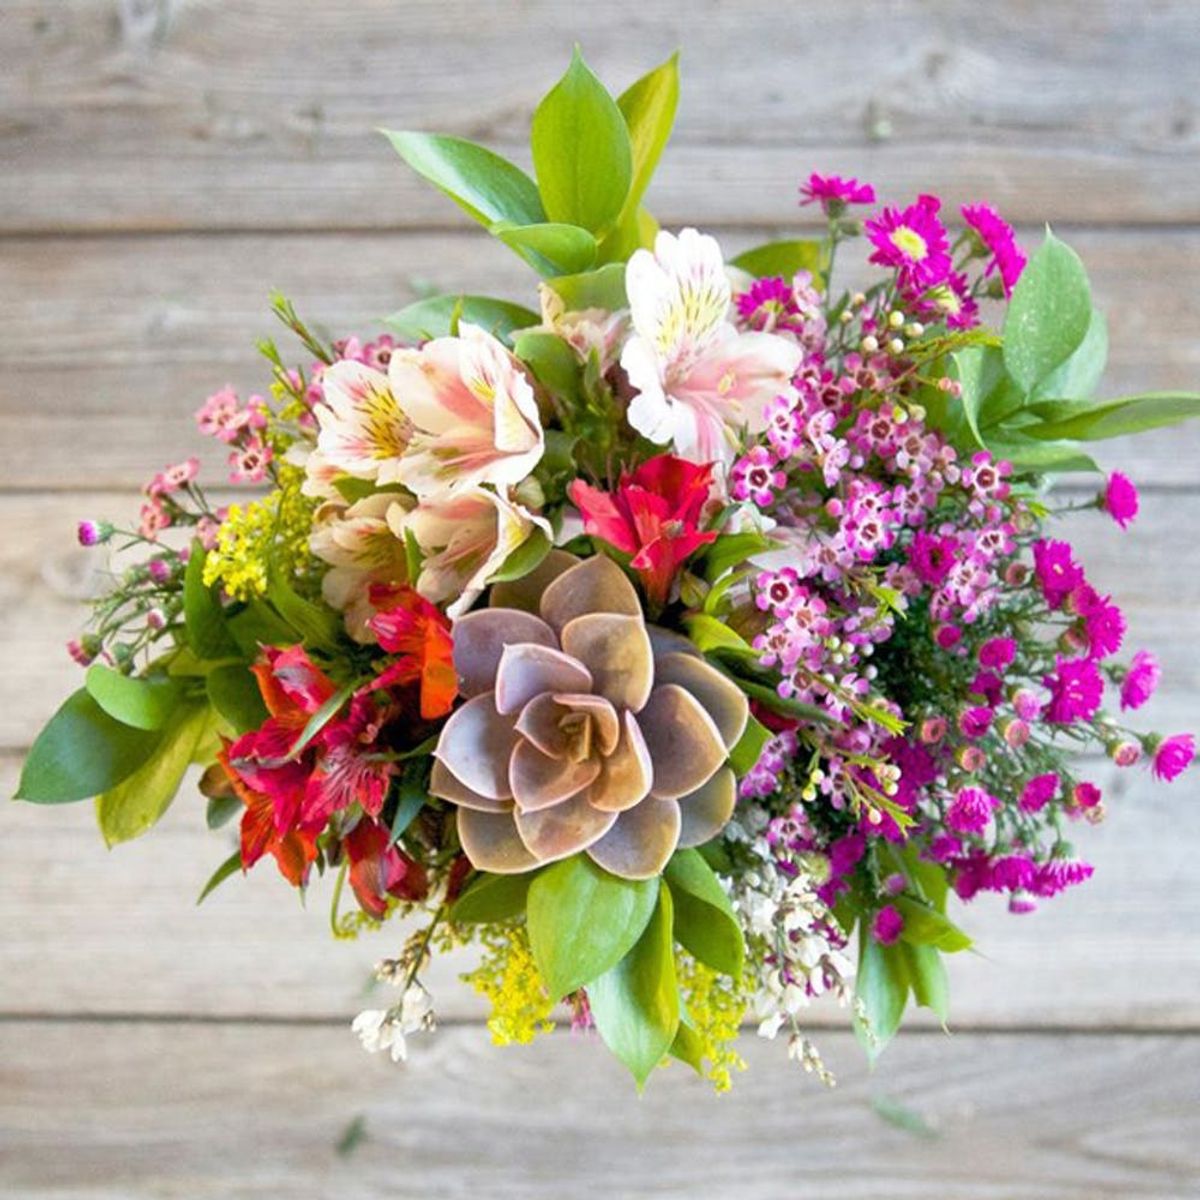 7 Super-Easy Ways to Get Mom Flowers on Mother’s Day